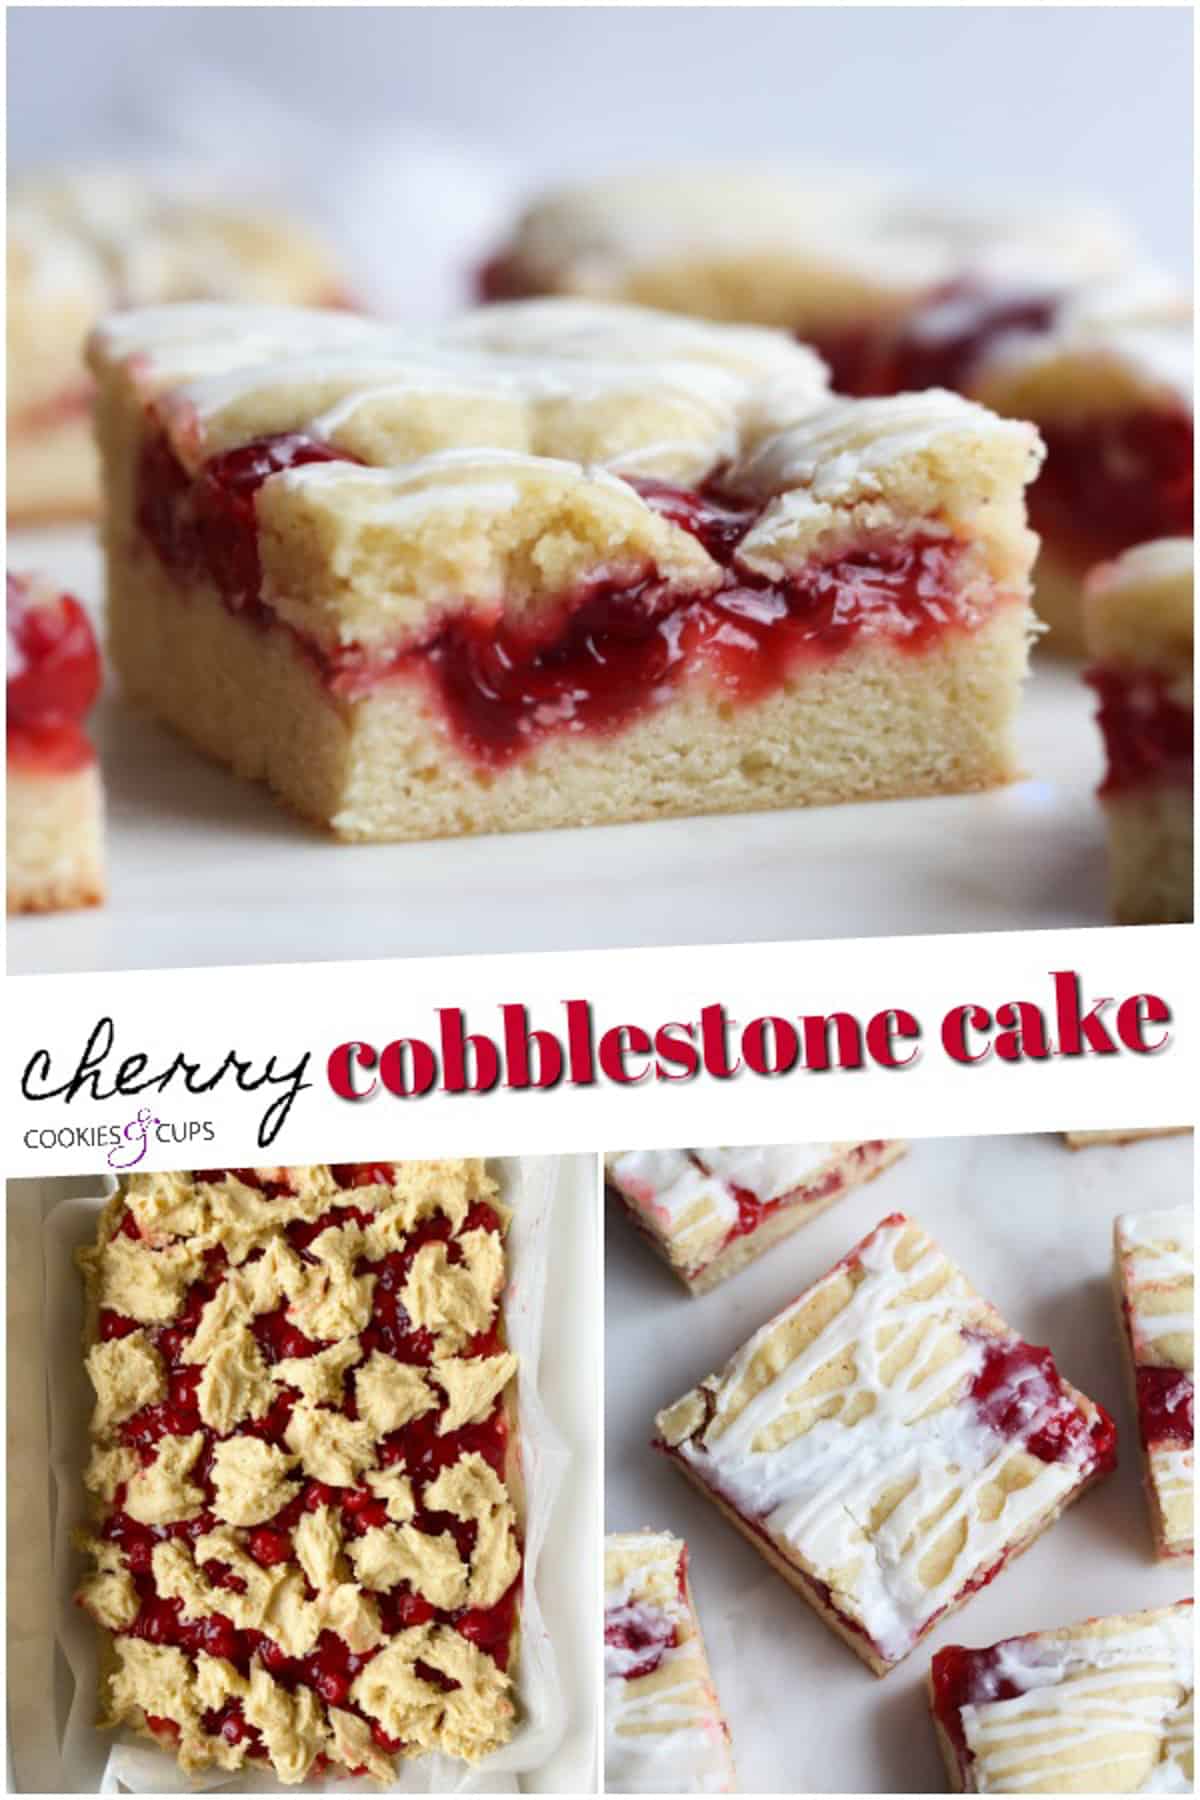 Cobblestone Cherry Cake Pinterest Image collage with text